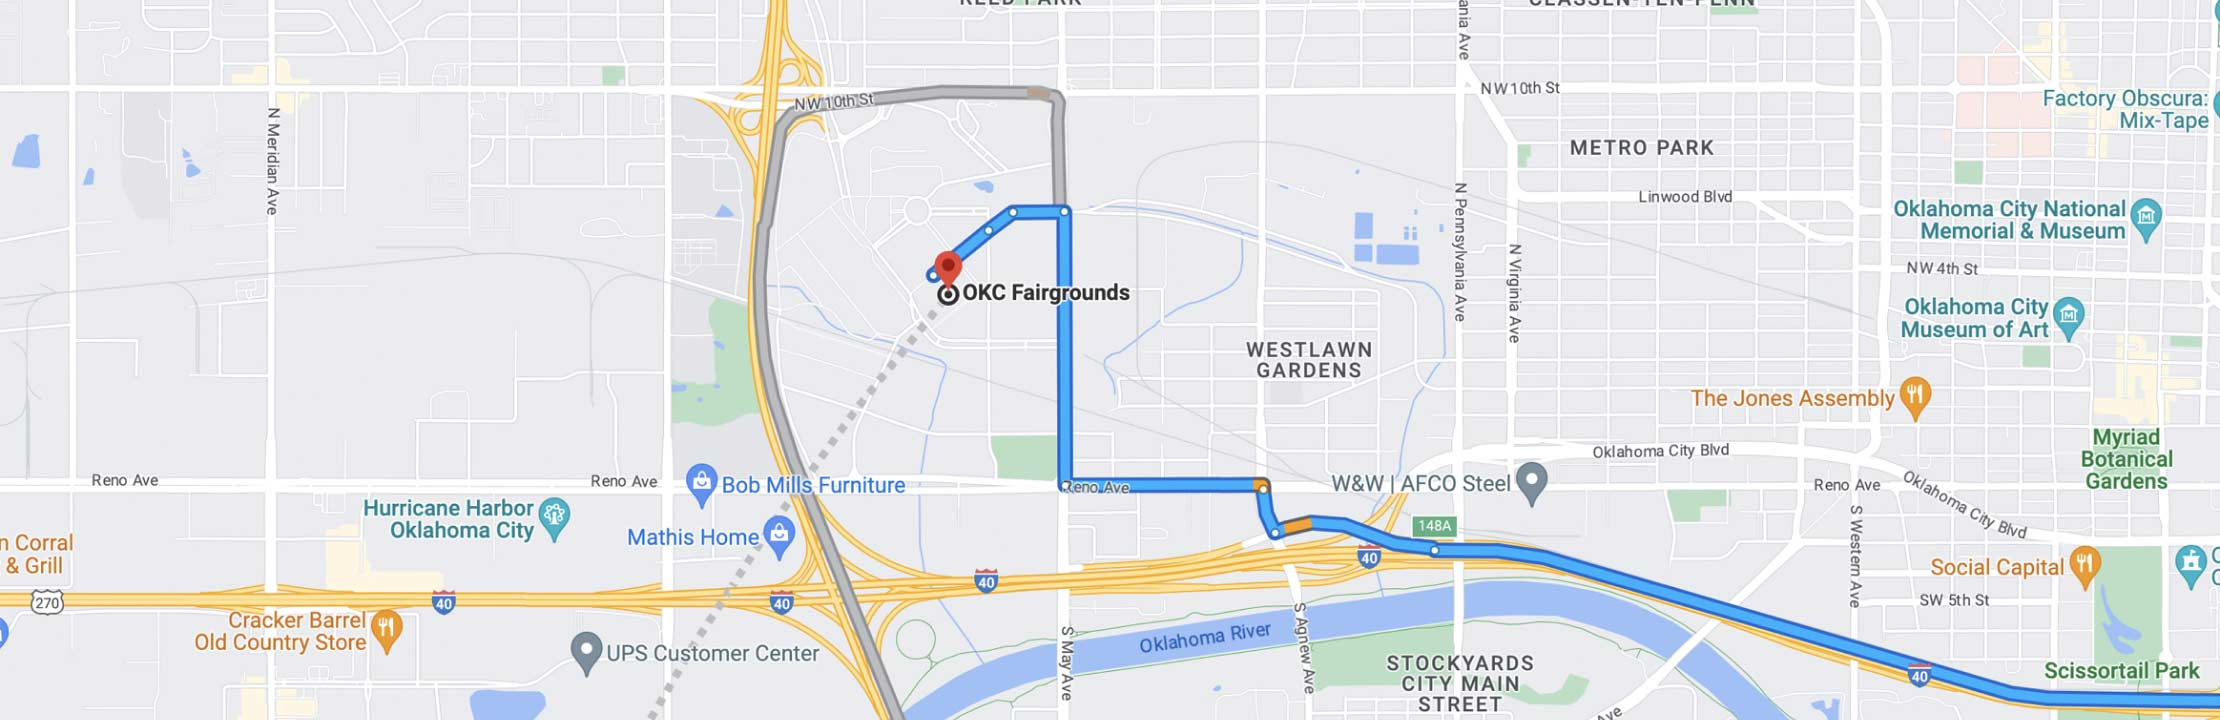 map showing route to Expo location at OKC Fairgrounds